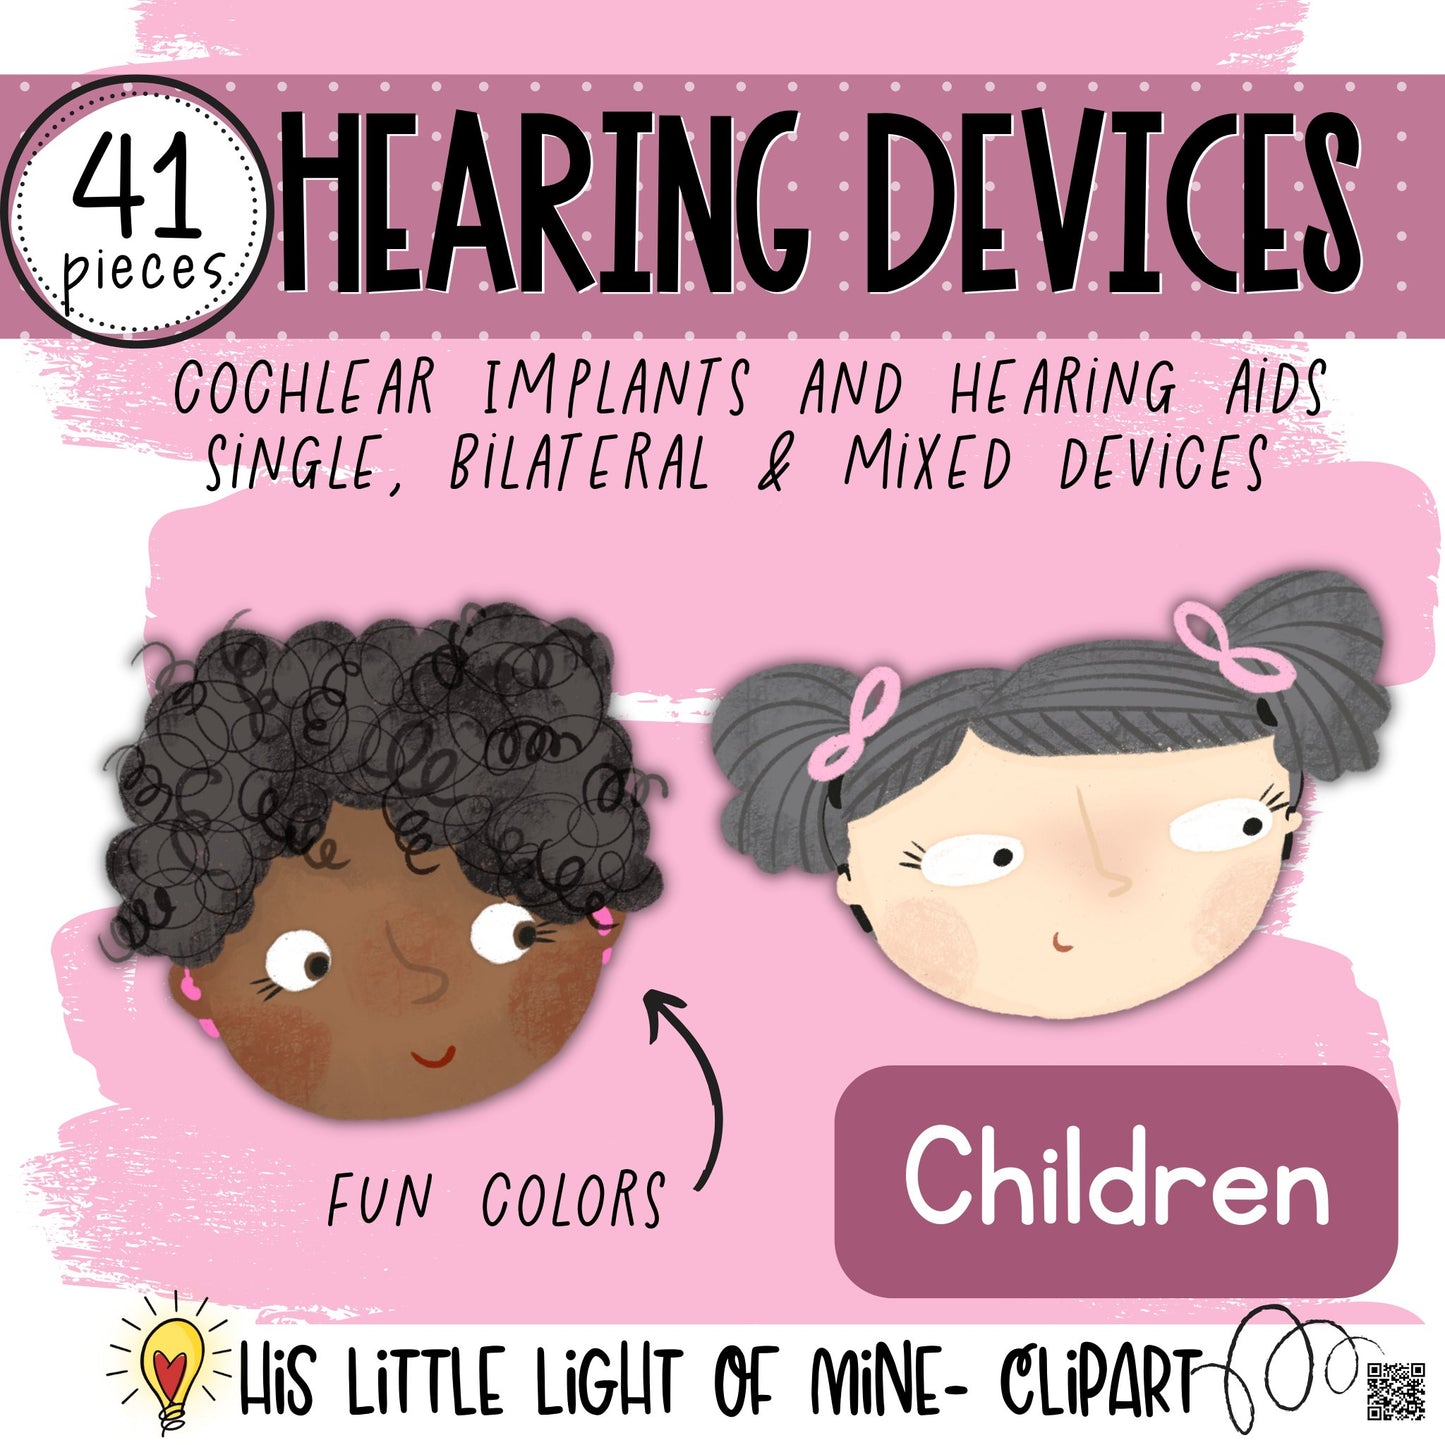 Cover Image of the Hearing Devices for children clip art pack featuring cochlear implants and hearing aids, single, bilateral and mixed devices.